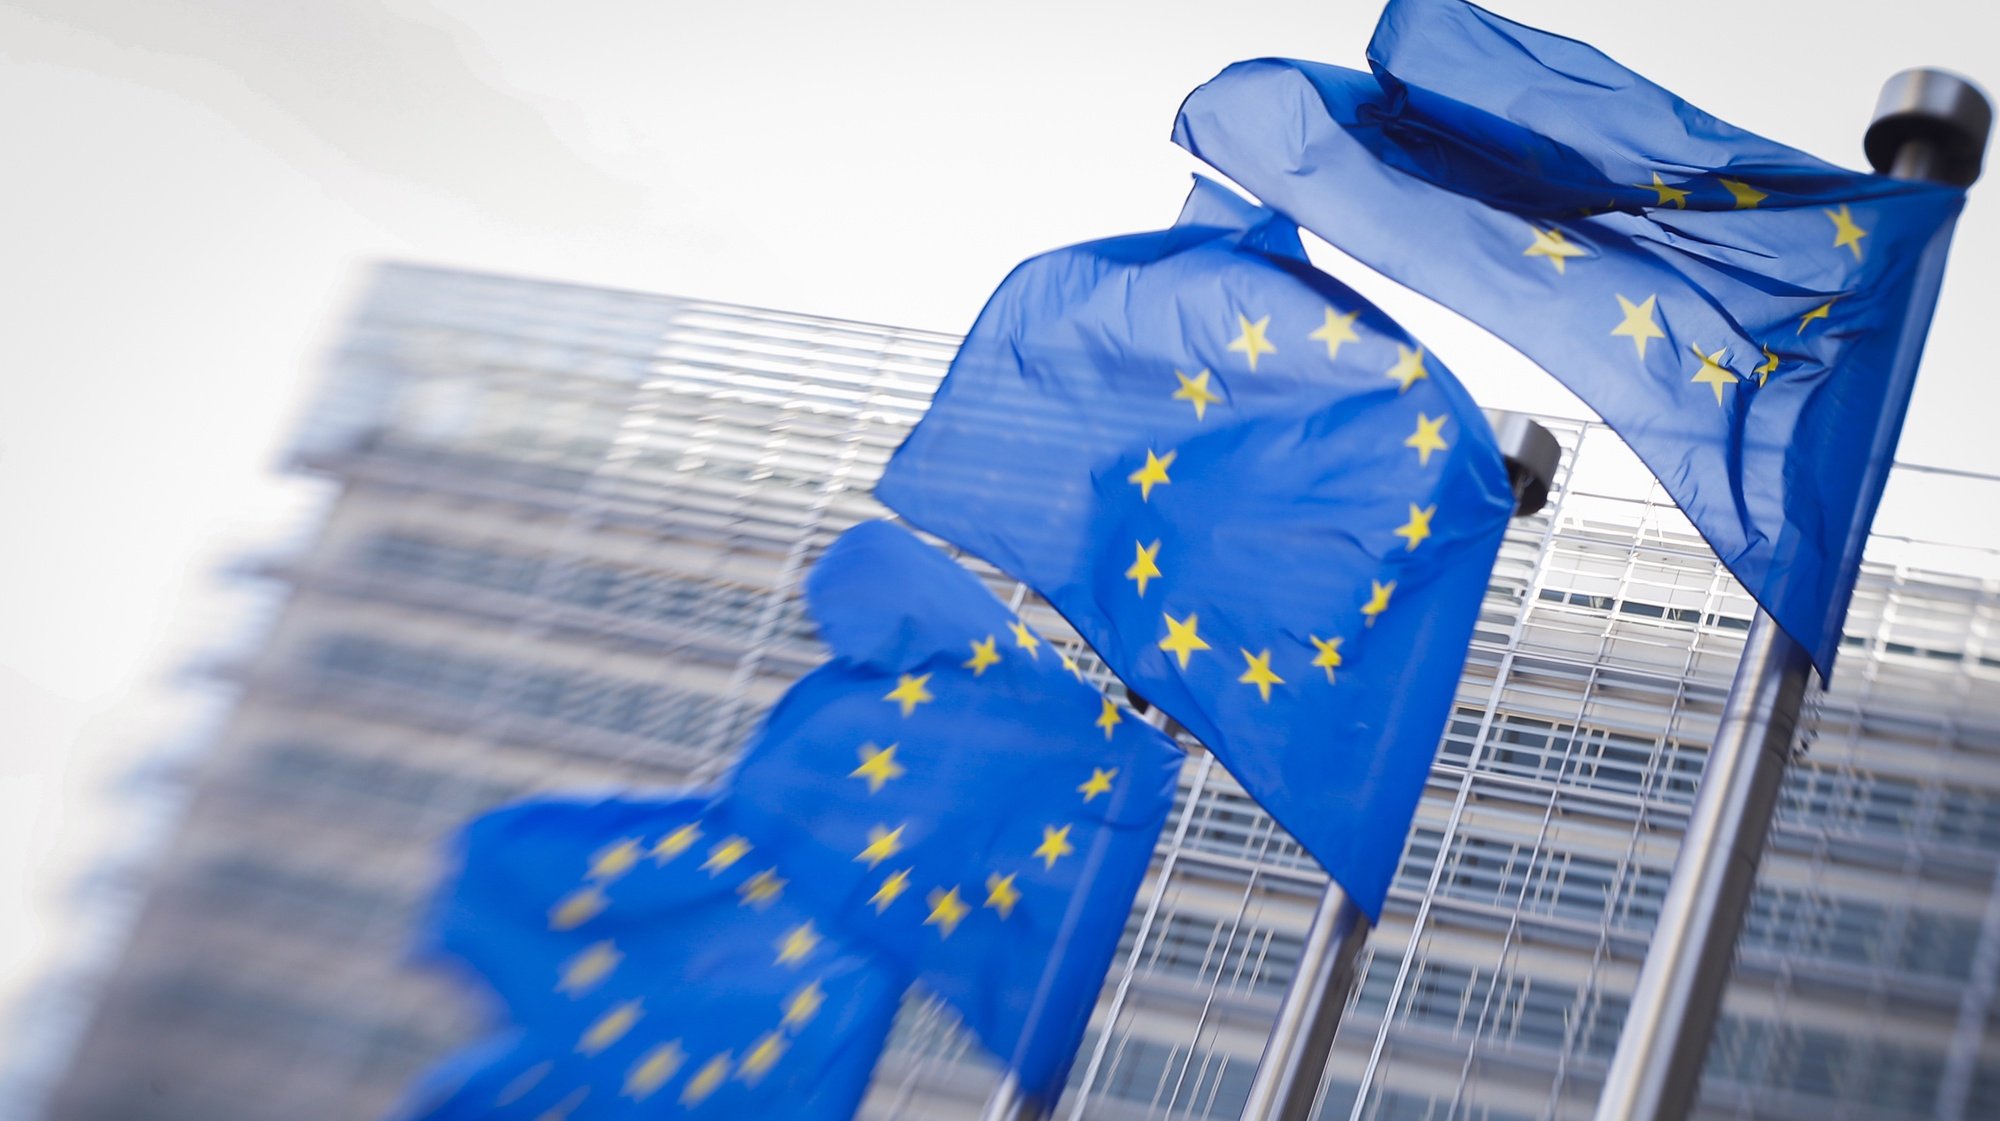 epa07134646 (FILE) - European flags in front of European commission headquarters in Brussels, Belgium, 26 June 2018 (reissued 01 November 2018). The treaty was signed on 07 February 1992 and was a milestone on the way from the original European Coal and Steel Community (ECSC) of 1951 to the modern European Union (EU). 01 November 2018 marks the 25th anniversary of the coming into force of the Treaty of Maastricht.  EPA/OLIVIER HOSLET